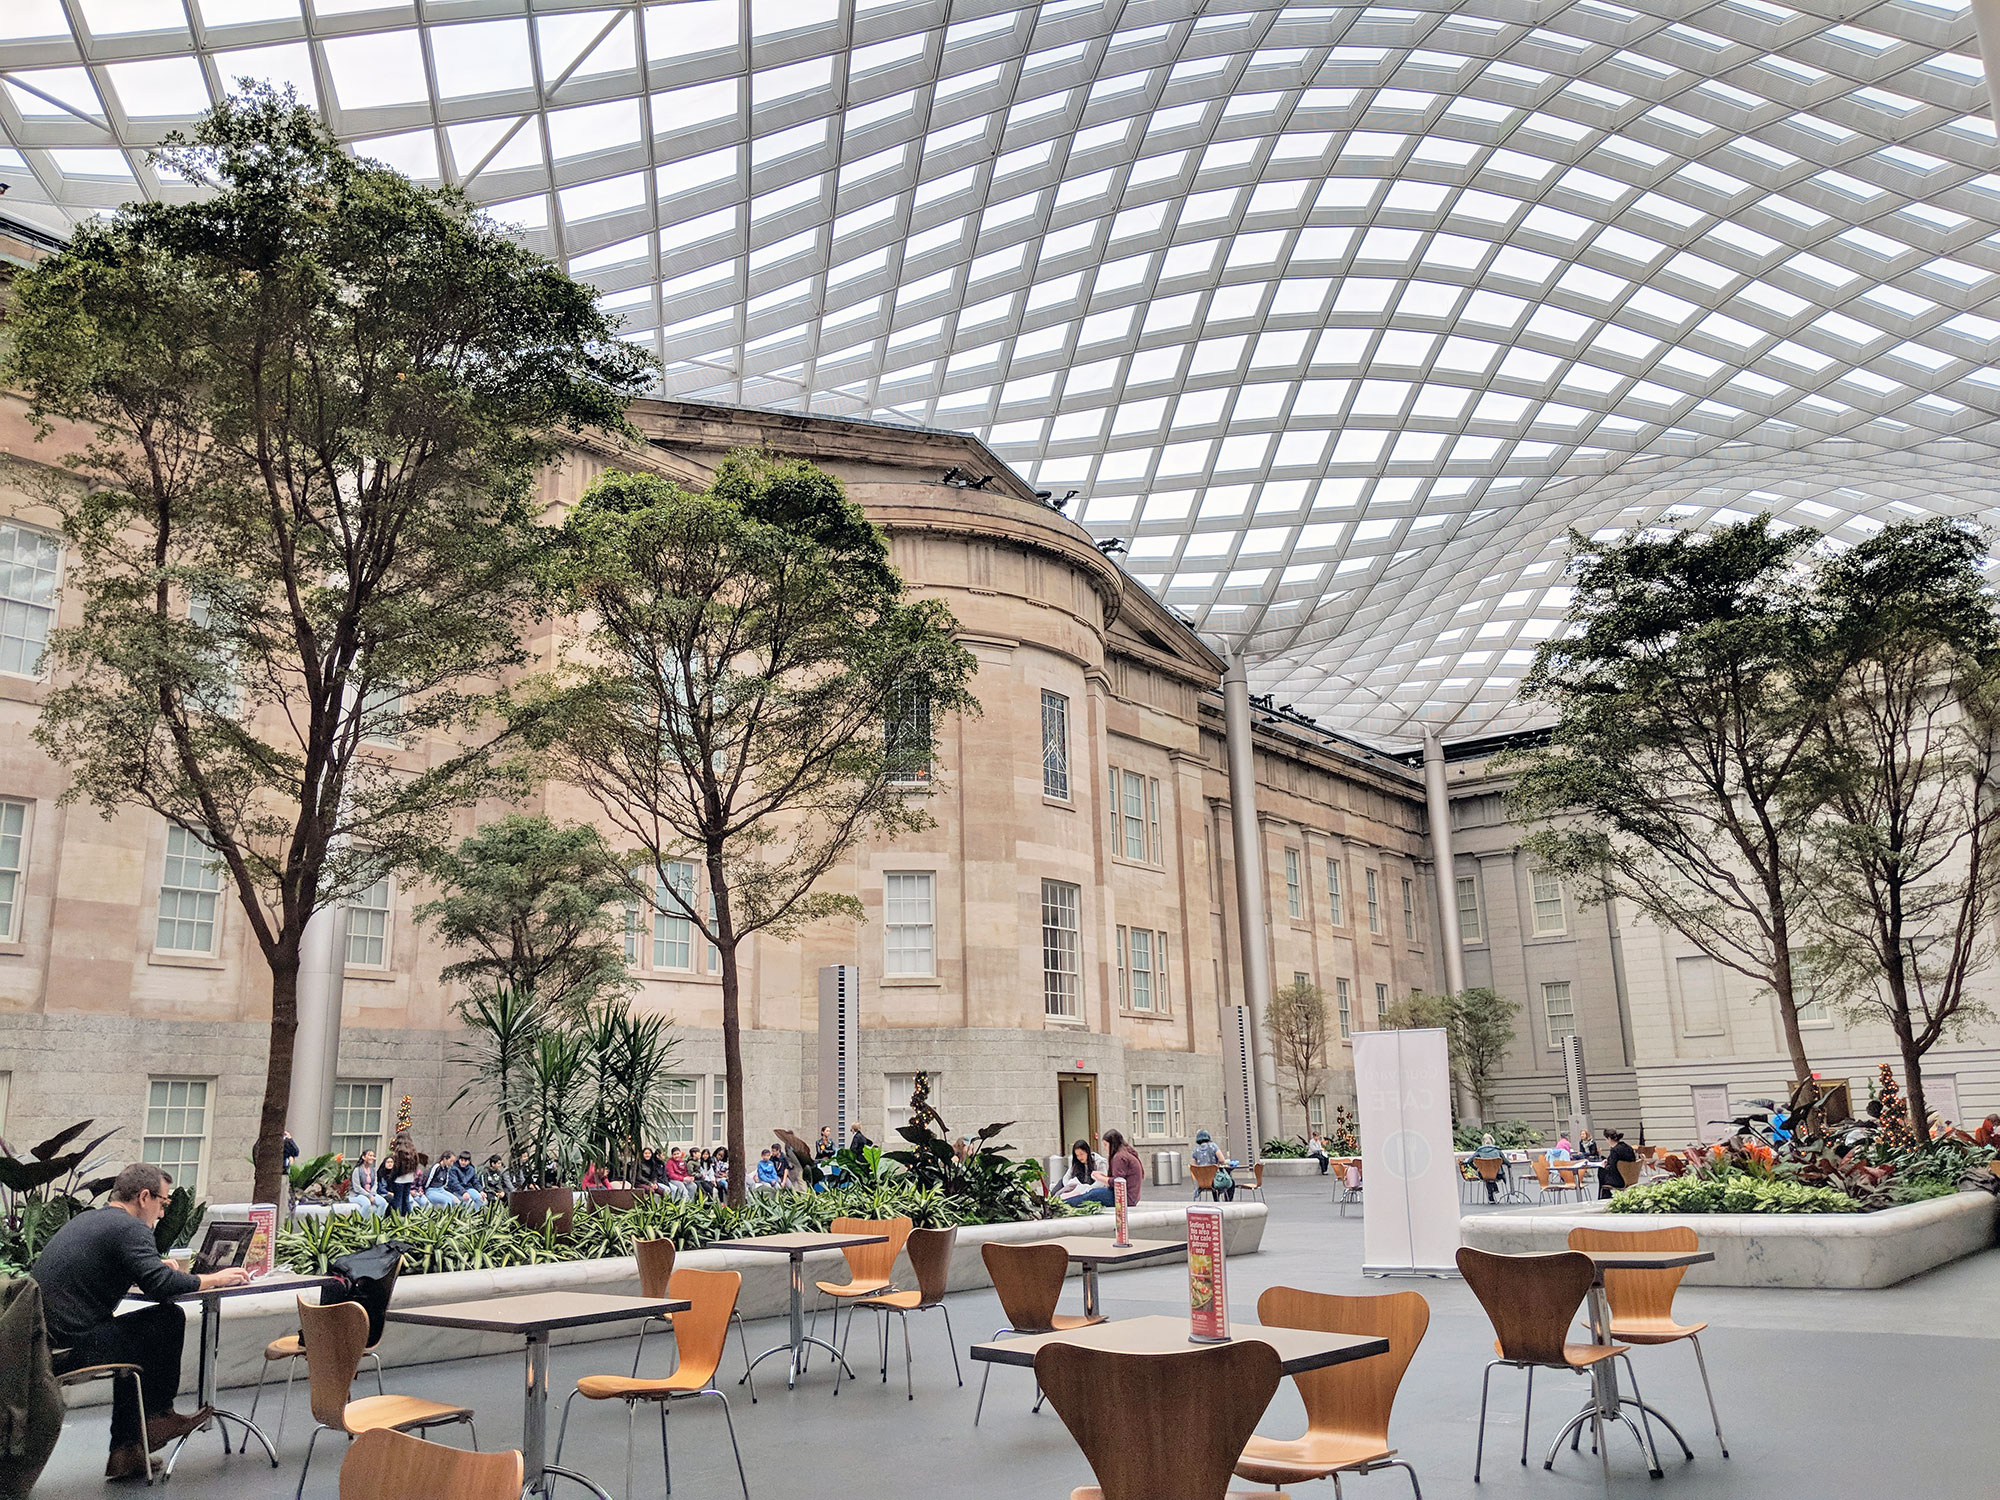 The interior courtyard of the National Portrait Gallery in Washington D.C.